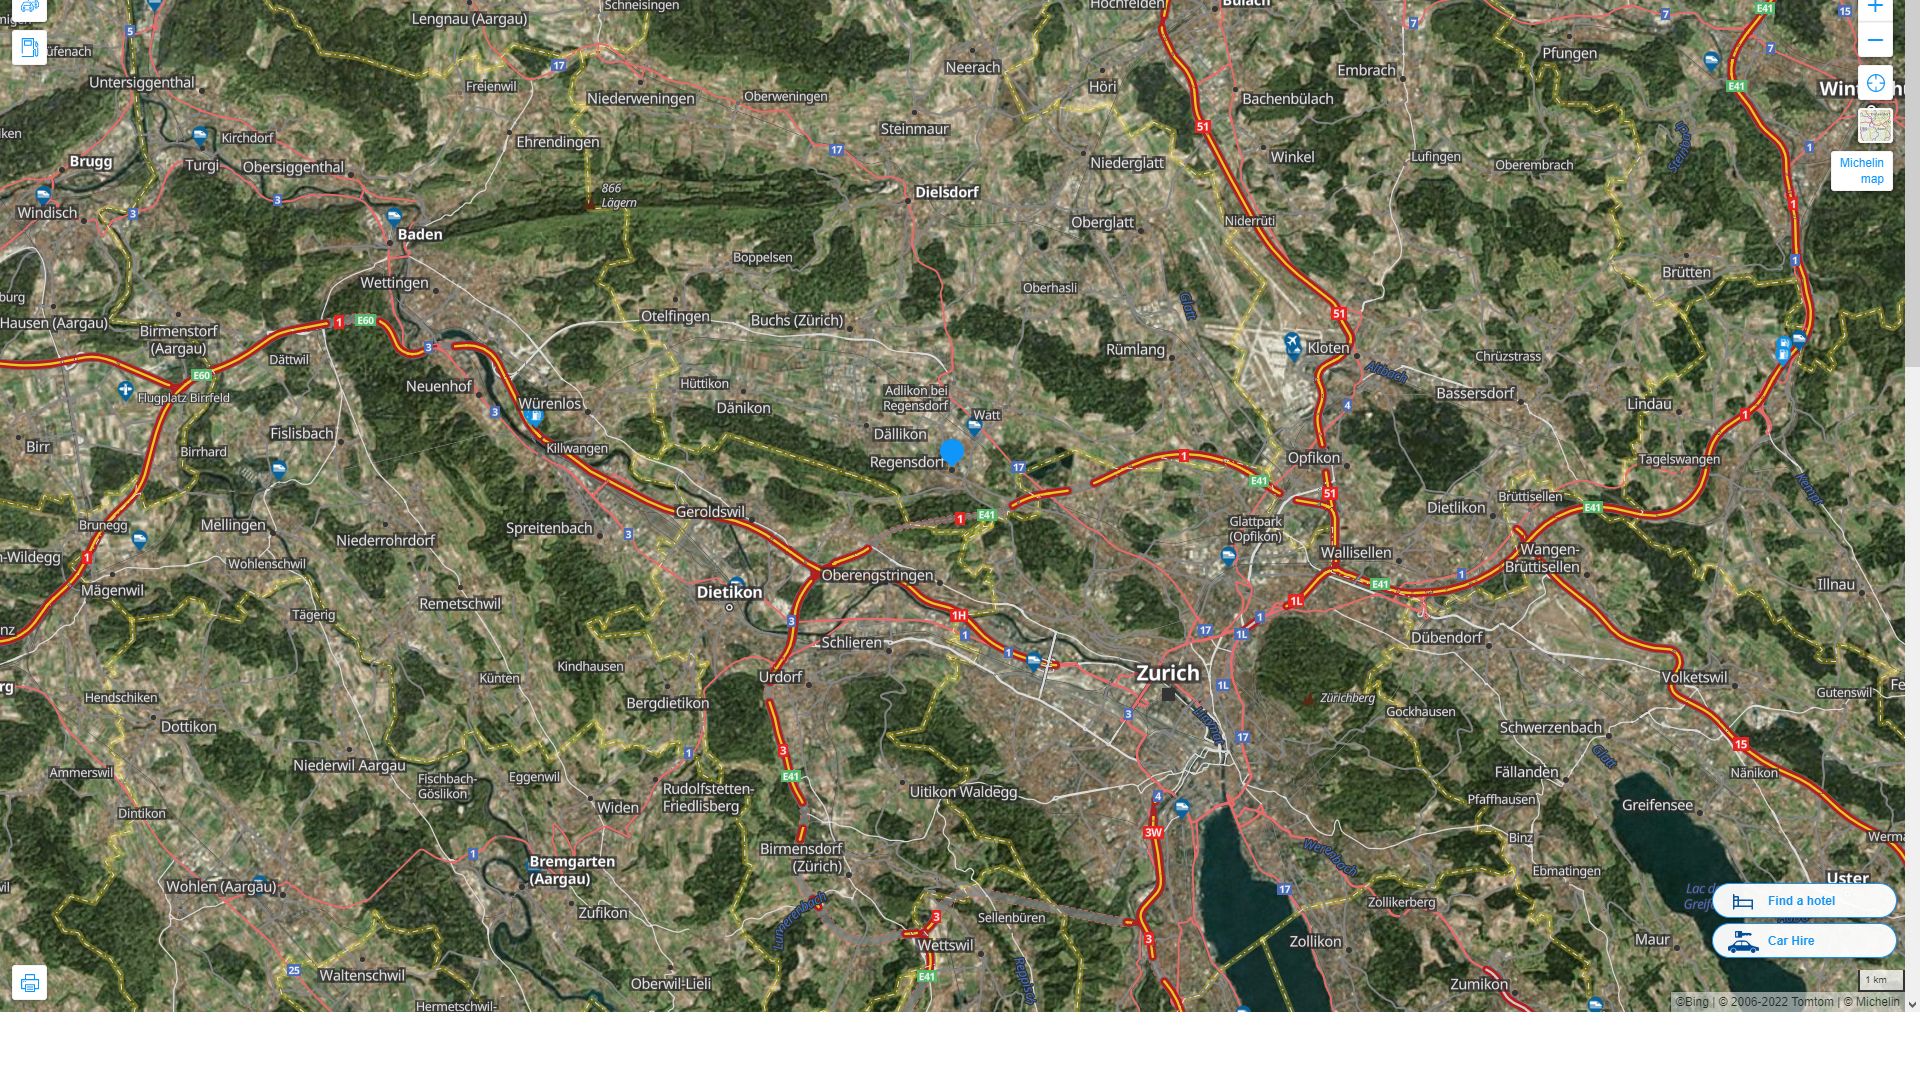 Regensdorf Highway and Road Map with Satellite View